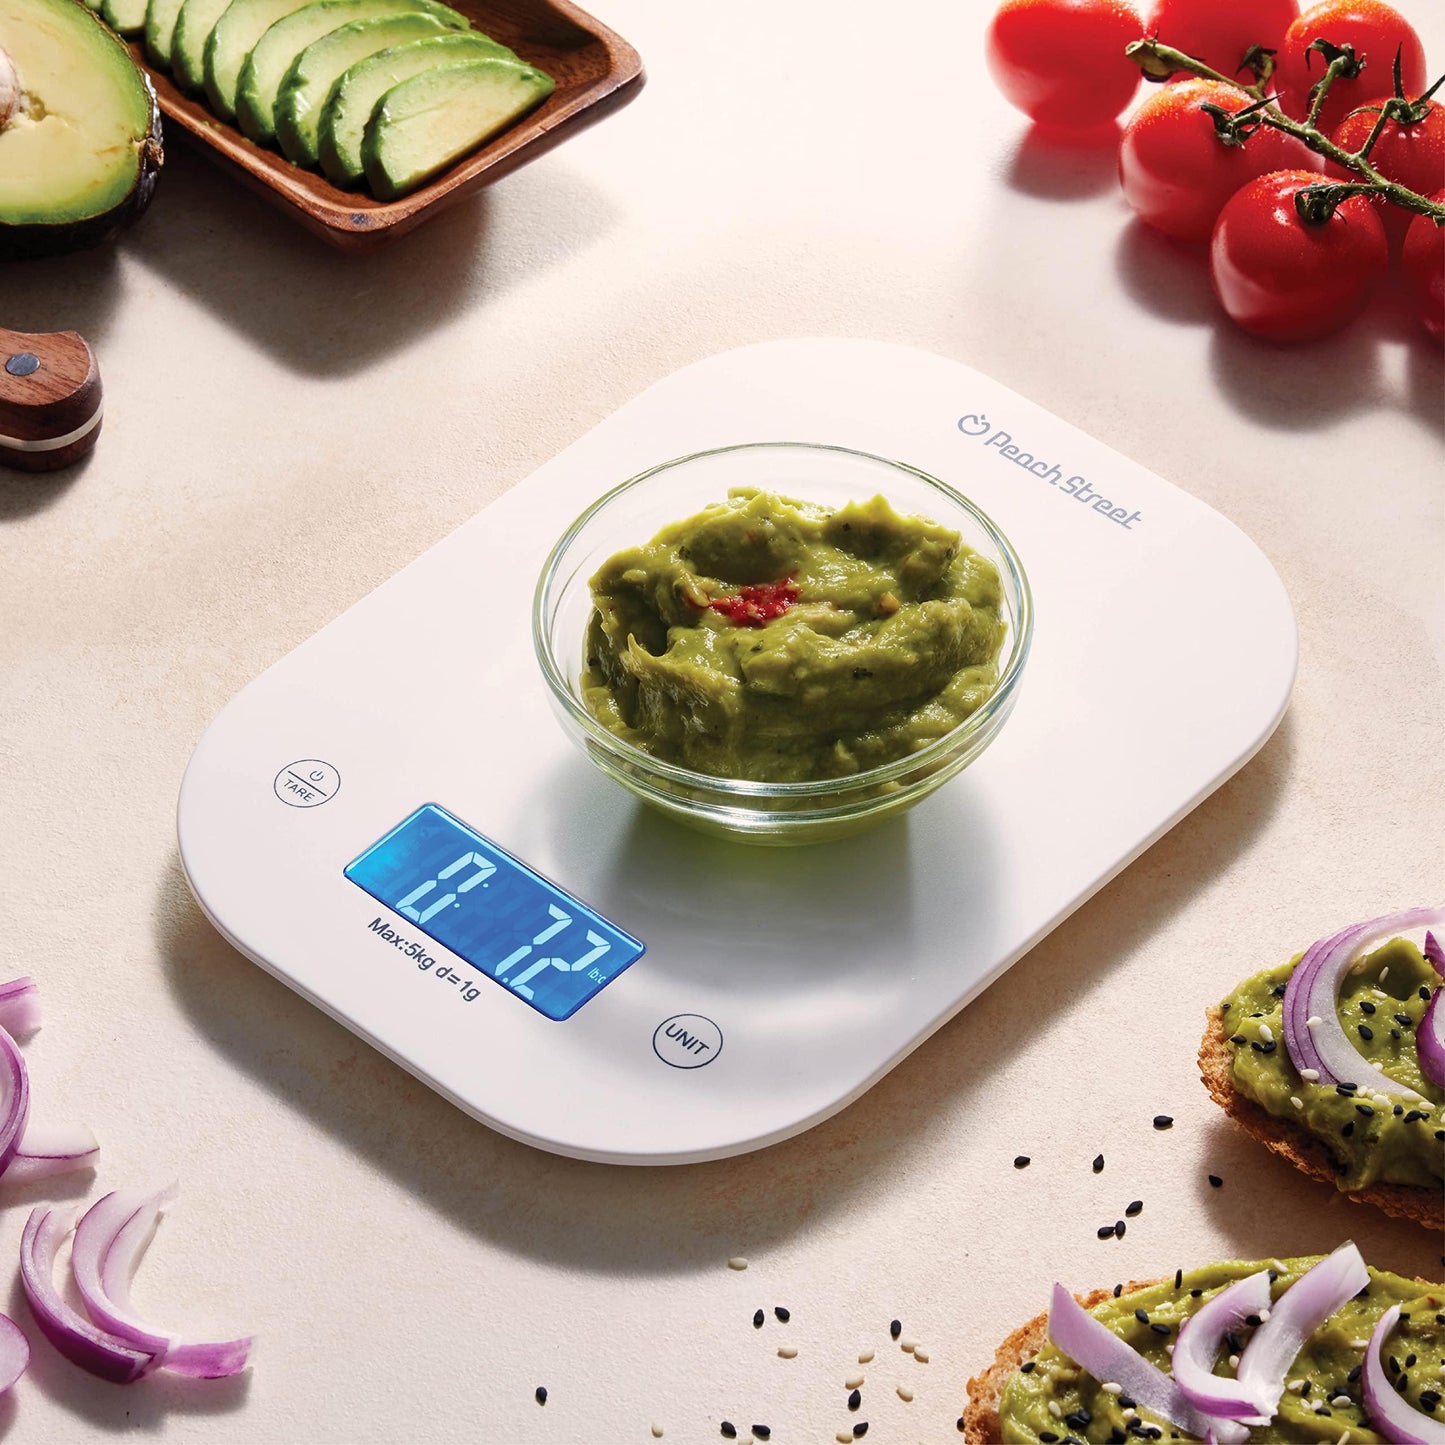 Digital Kitchen Food Scale - LCD Display Weight in Grams, Kilograms, Ounces, Fl Ounces, Milliliters, and Pounds Perfect for Precise Measurements, Baking, Cooking, Meal Prep, Weight Loss, - CookCave